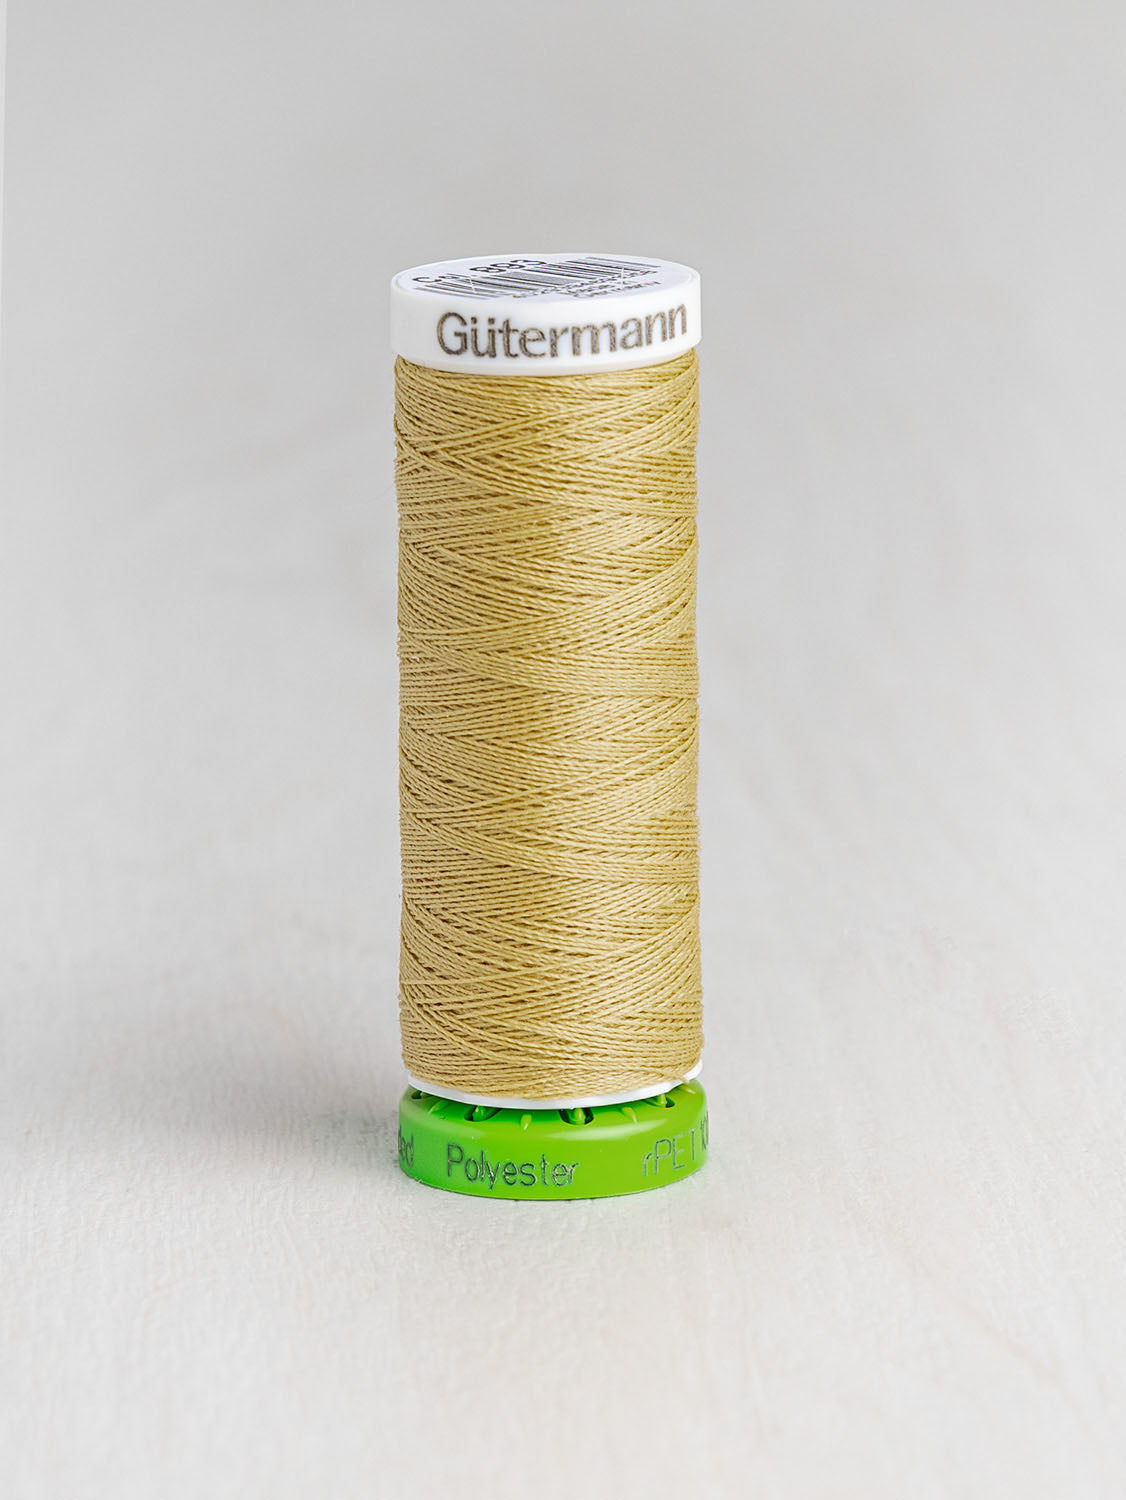 Gütermann All Purpose rPET Recycled Thread - Coral 895